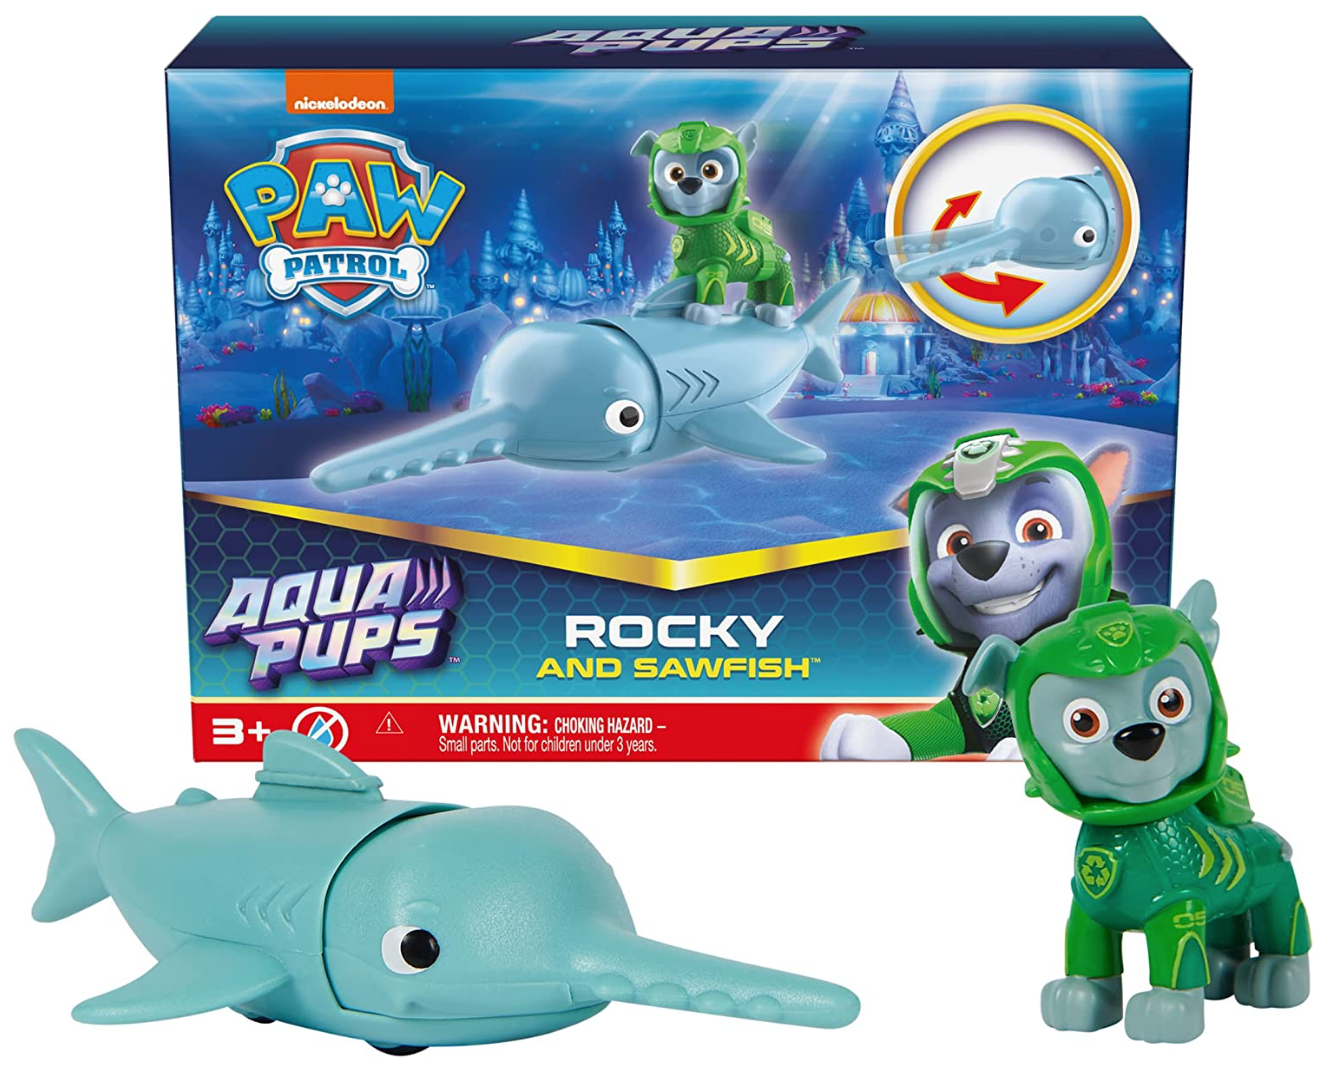 PAW Patrol Aqua Pups Rocky and Sawfish Action Figures Set Kids Toy New With Box